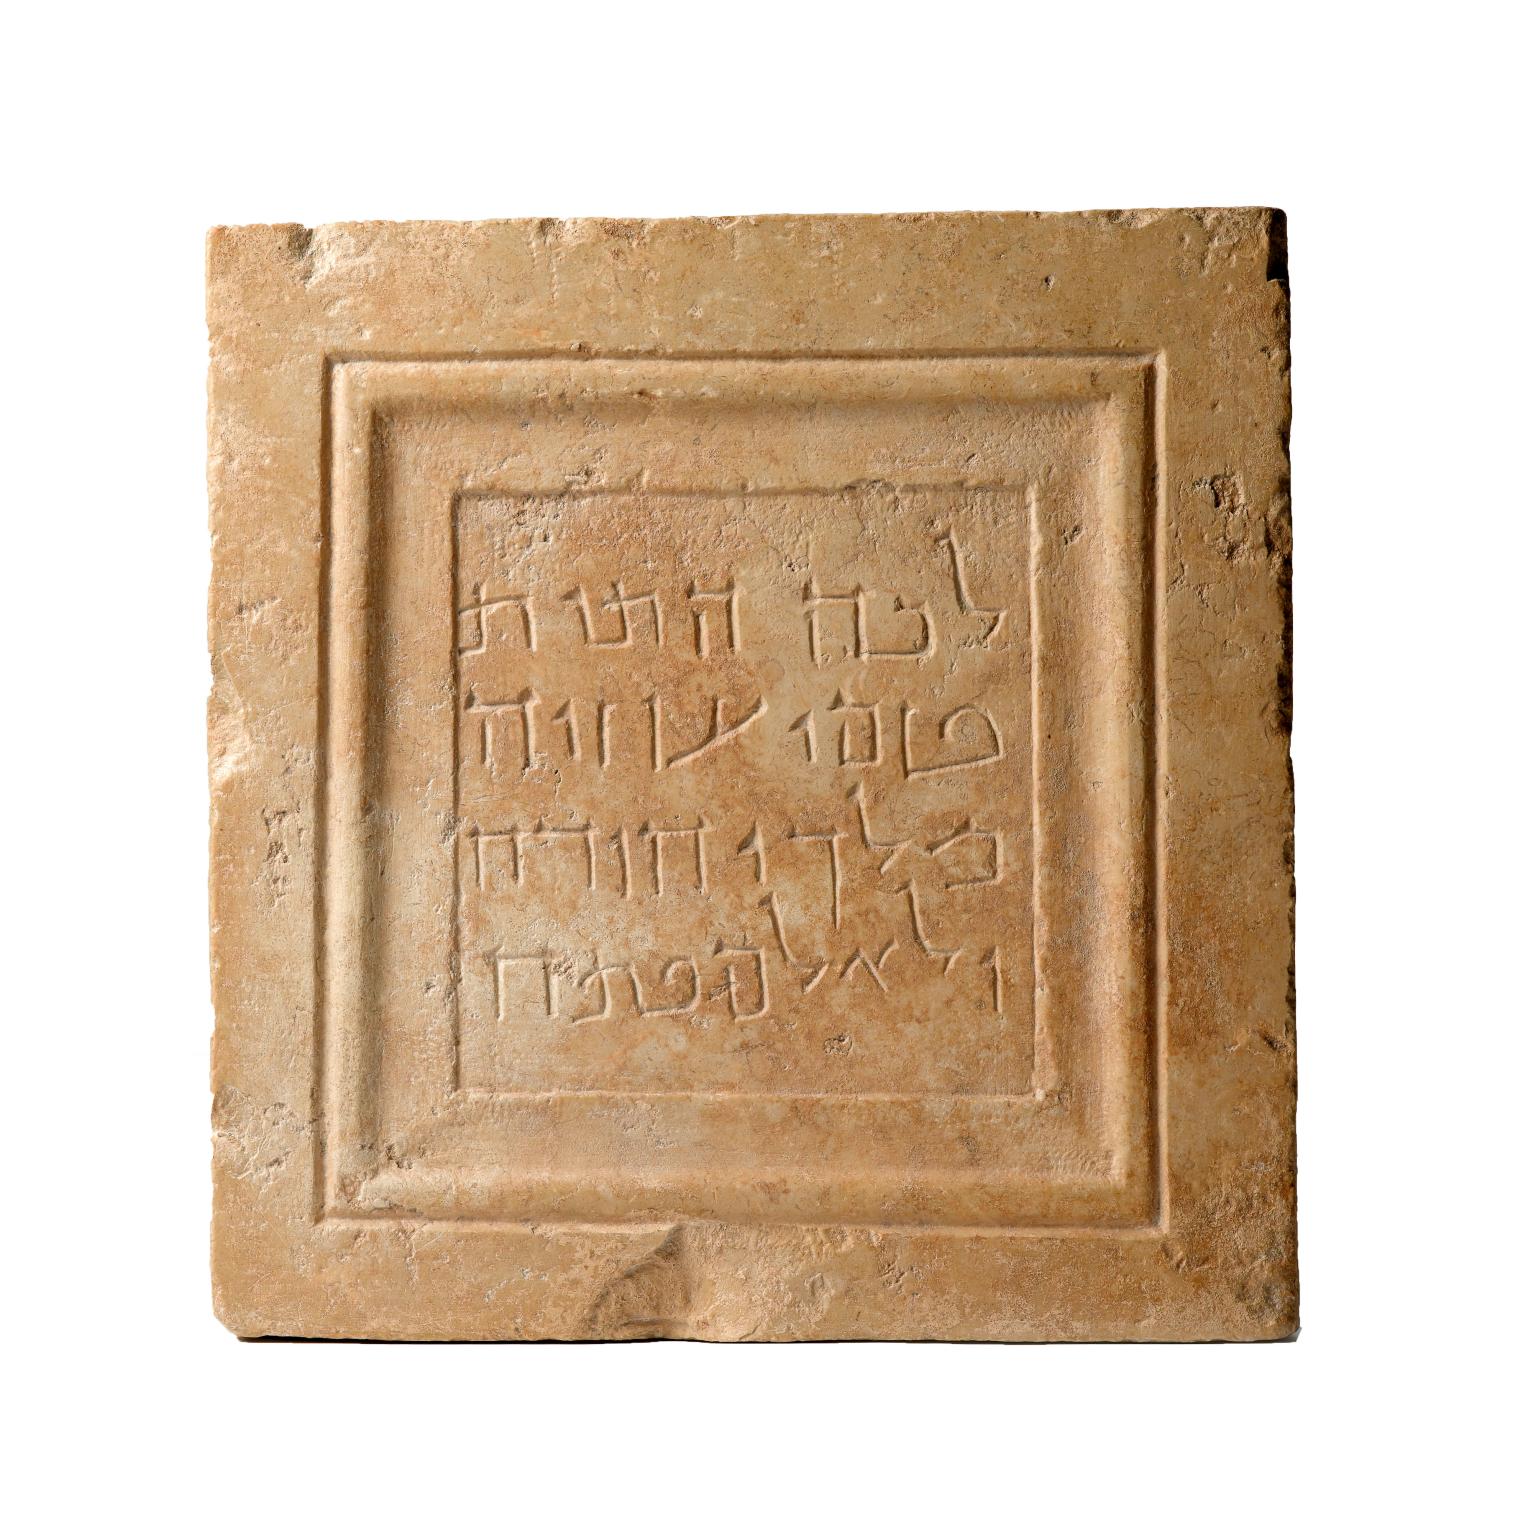 Square inscribed with Aramaic writing.